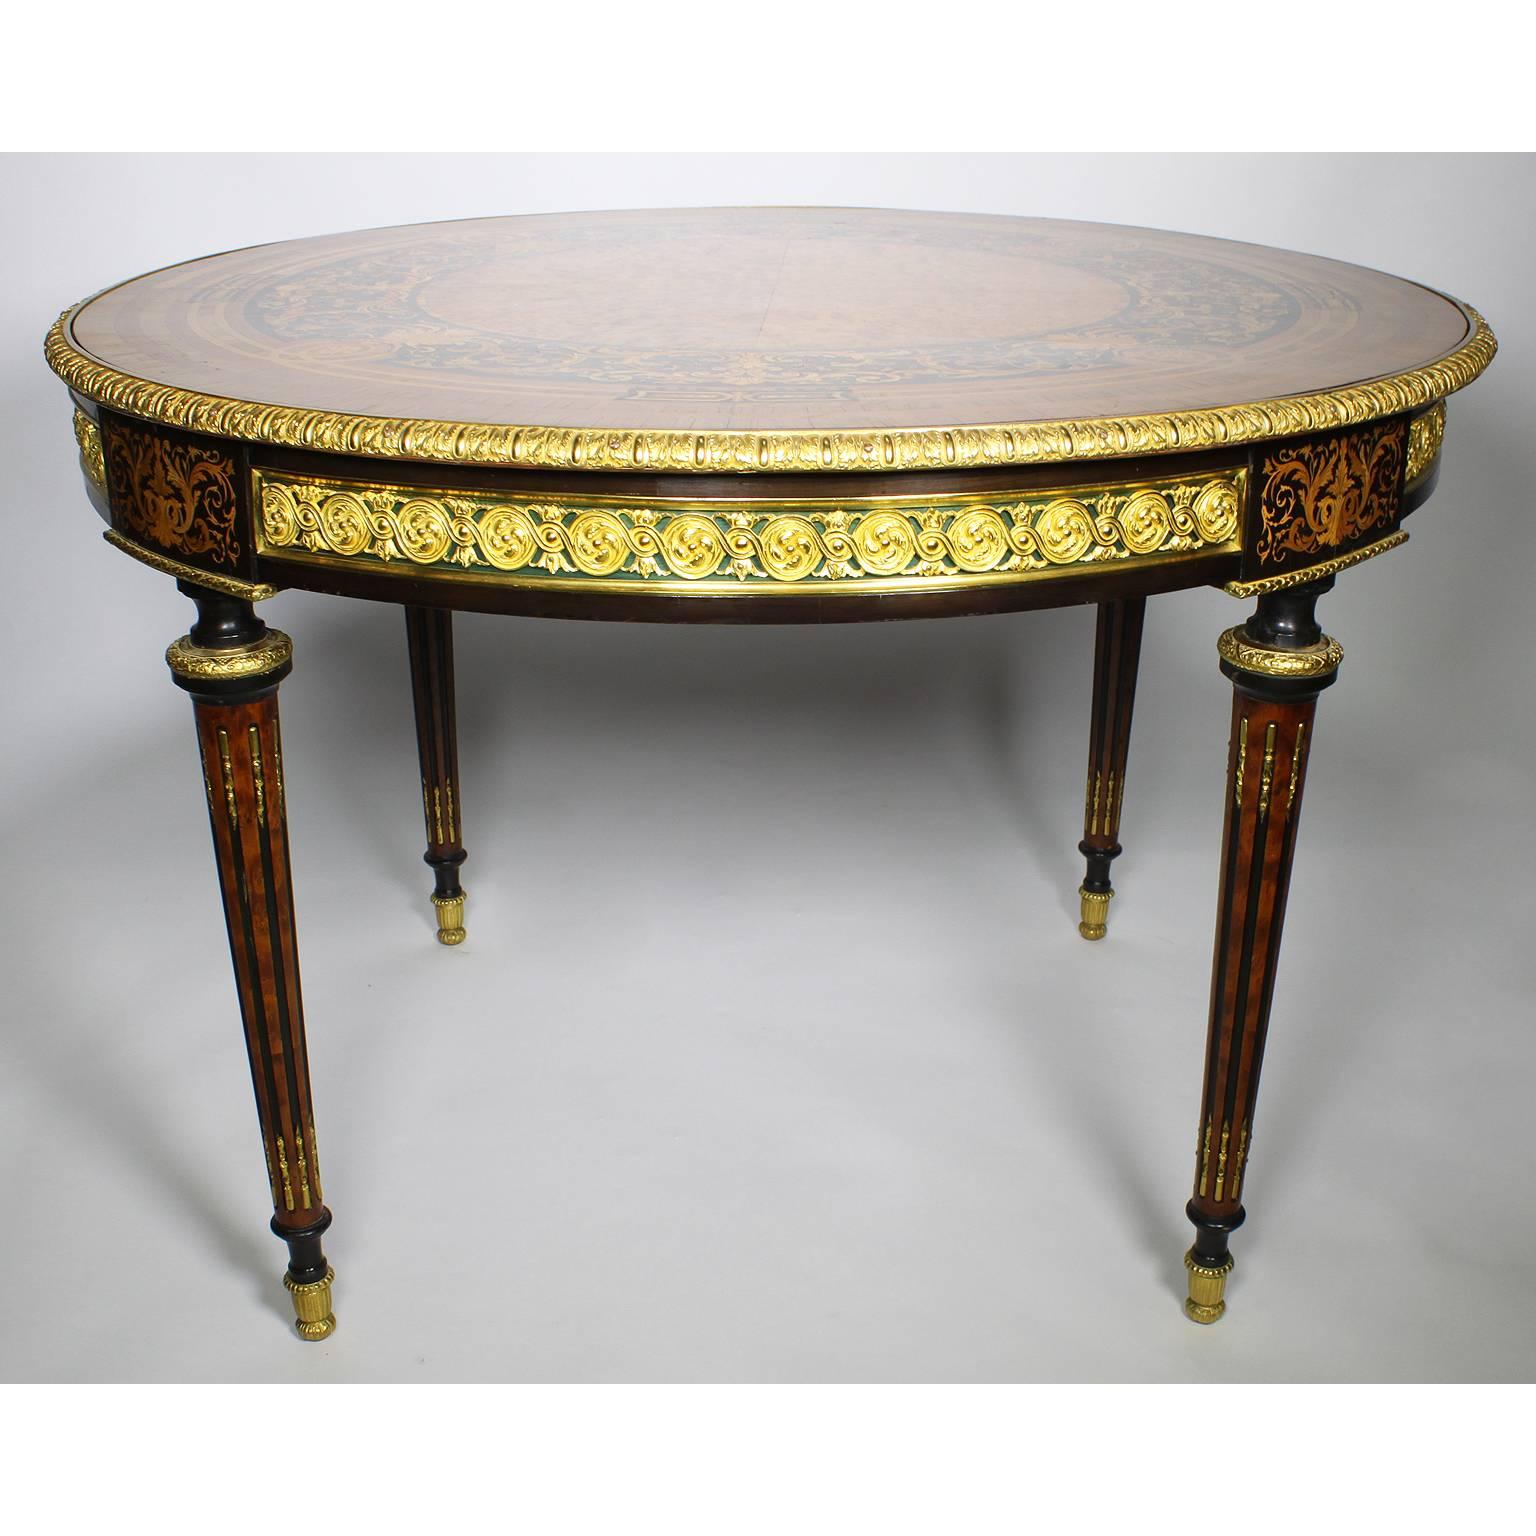 French 19th Century Louis XVI Style Gilt-Bronze Mounted Marquetry Center Table For Sale 1